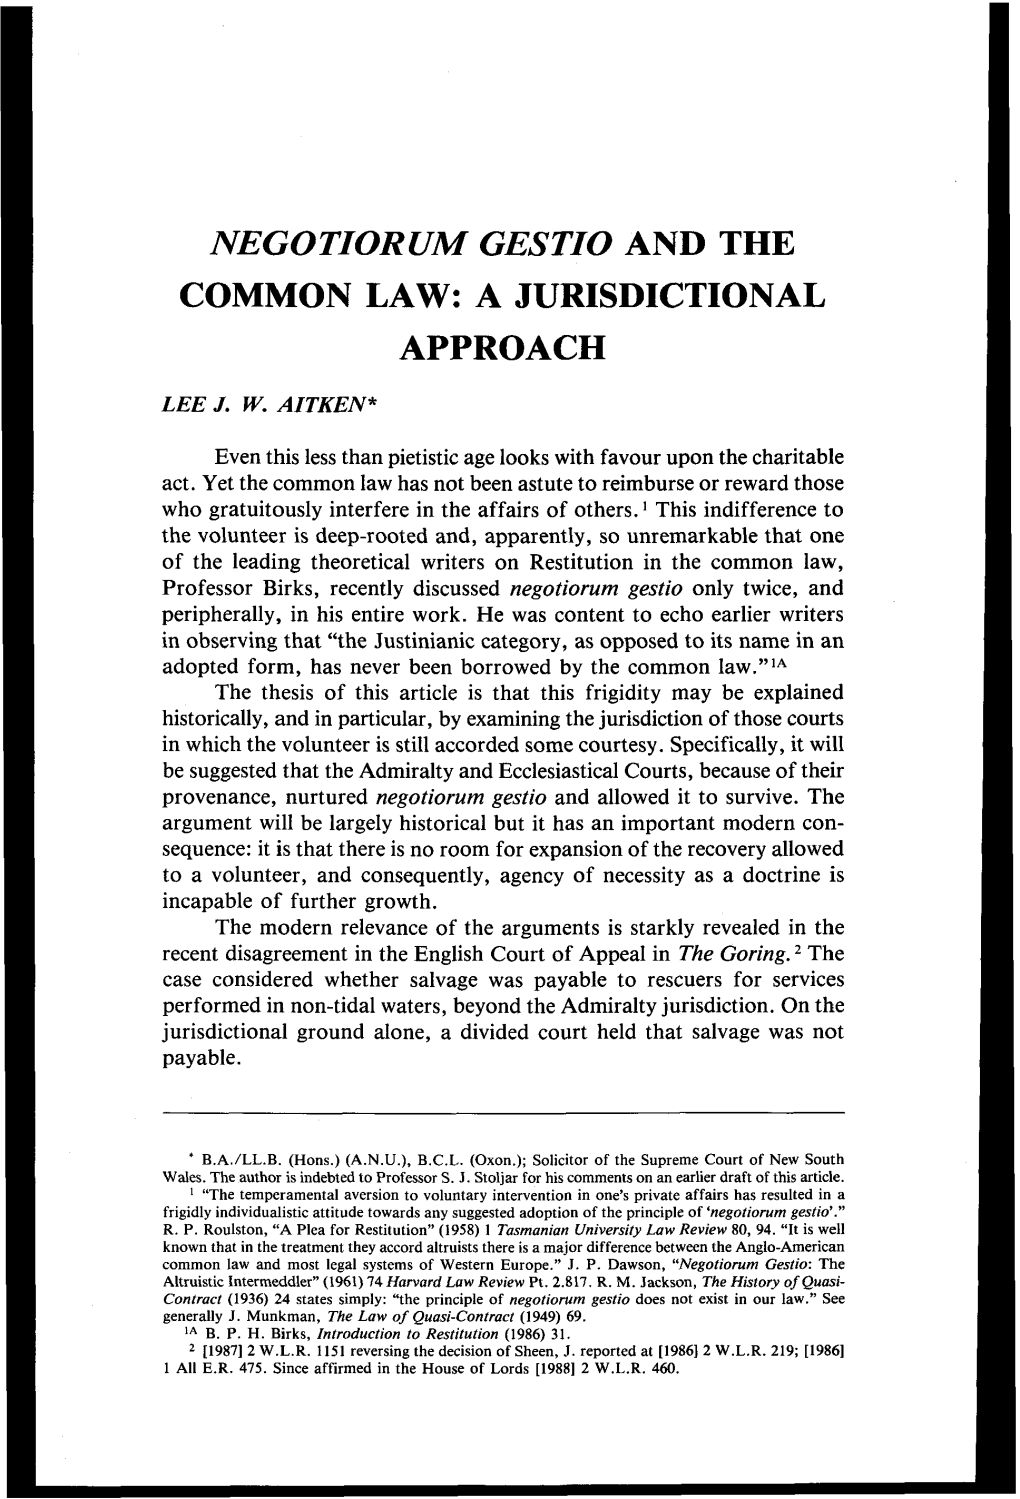 Negotiorum Gestio and the Common Law: a Jurisdictional Approach